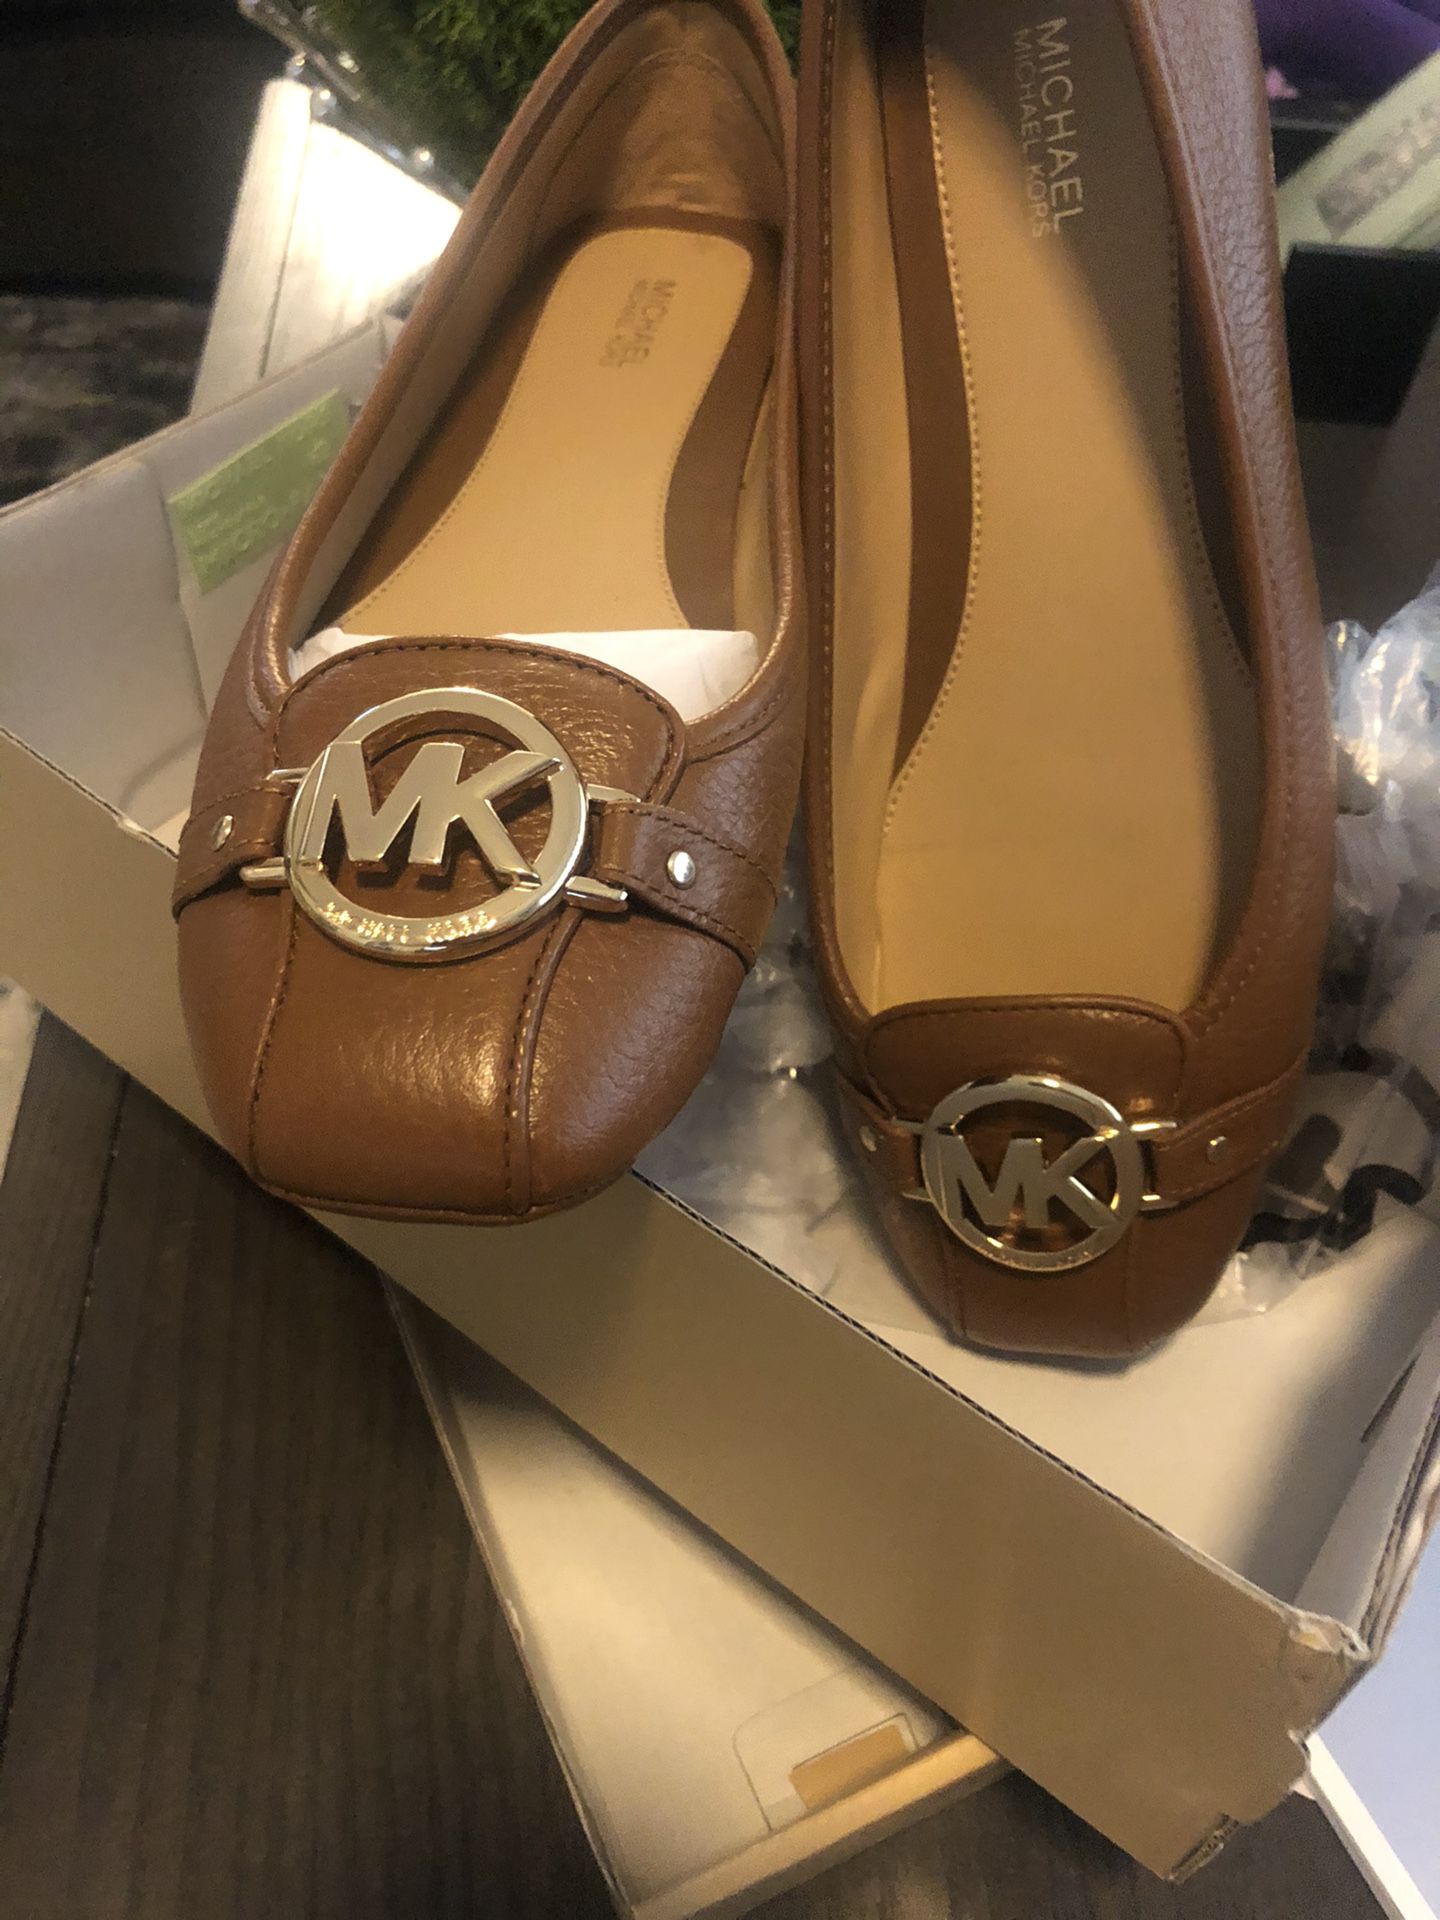 Brand women’s MK leather flats size 9. Retails for $120.